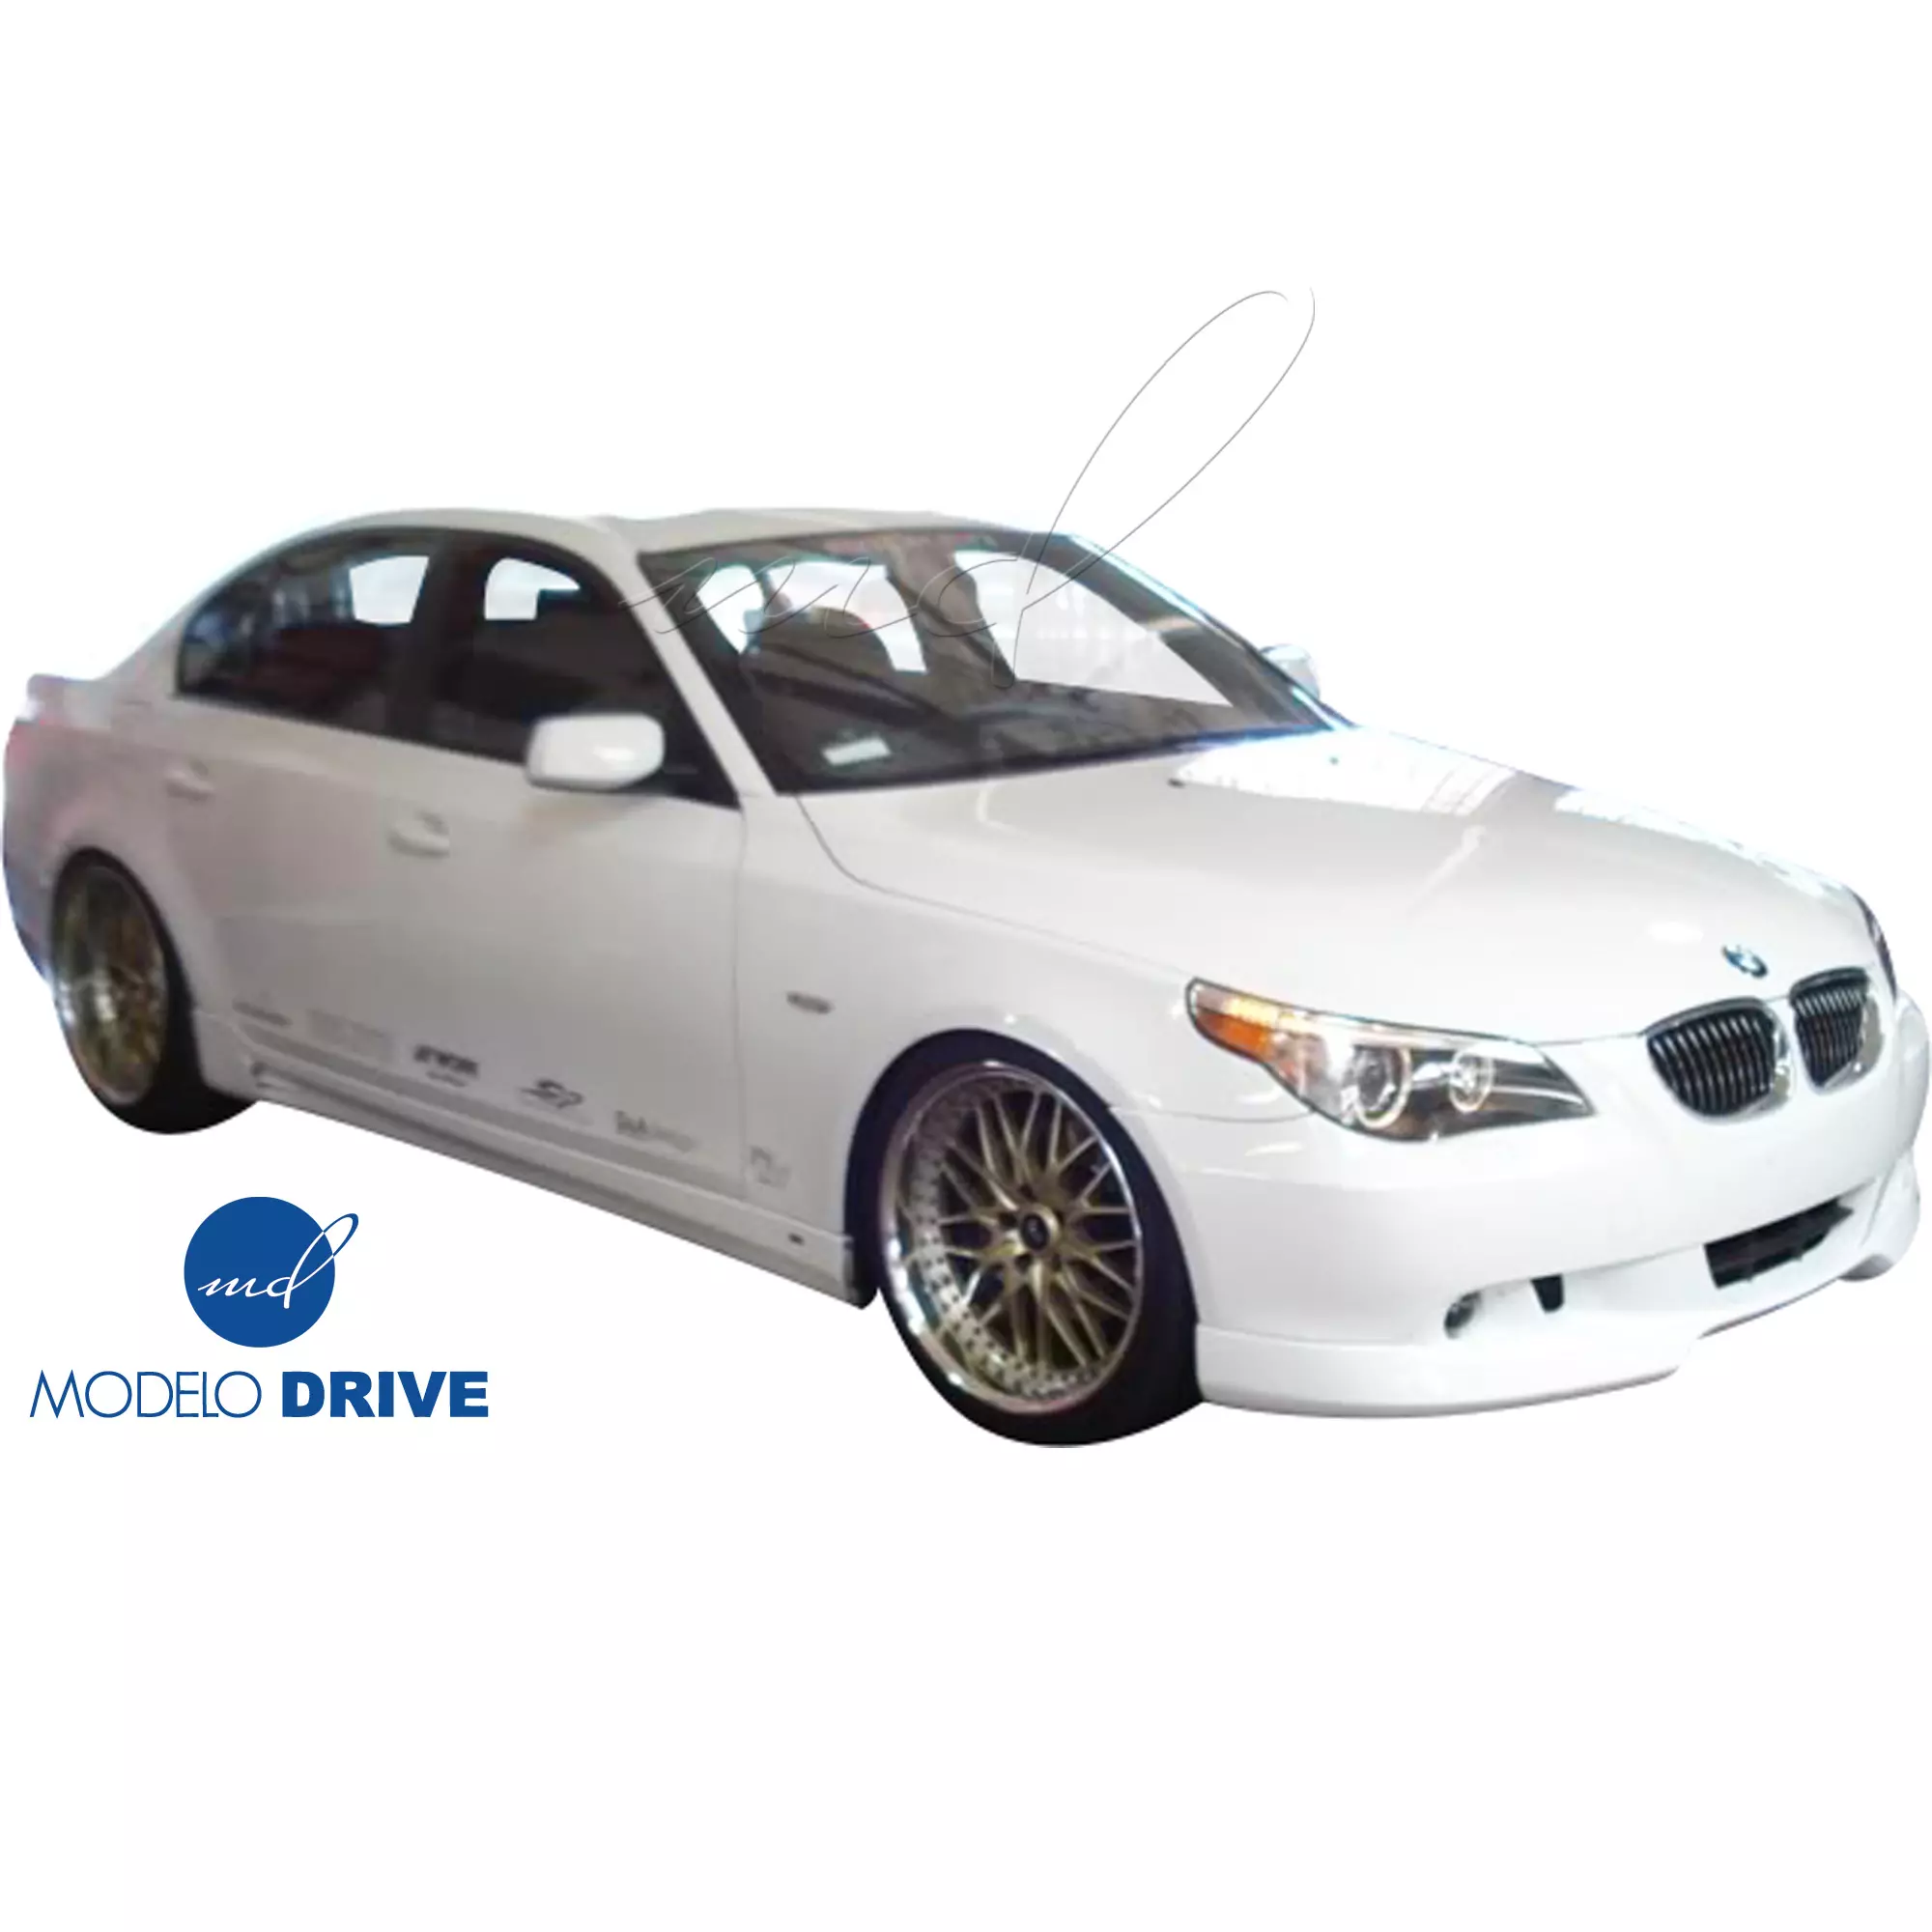 ModeloDrive FRP ASCH Front Valance Add-on > BMW 5-Series E60 2004-2010 > 4dr - Image 2